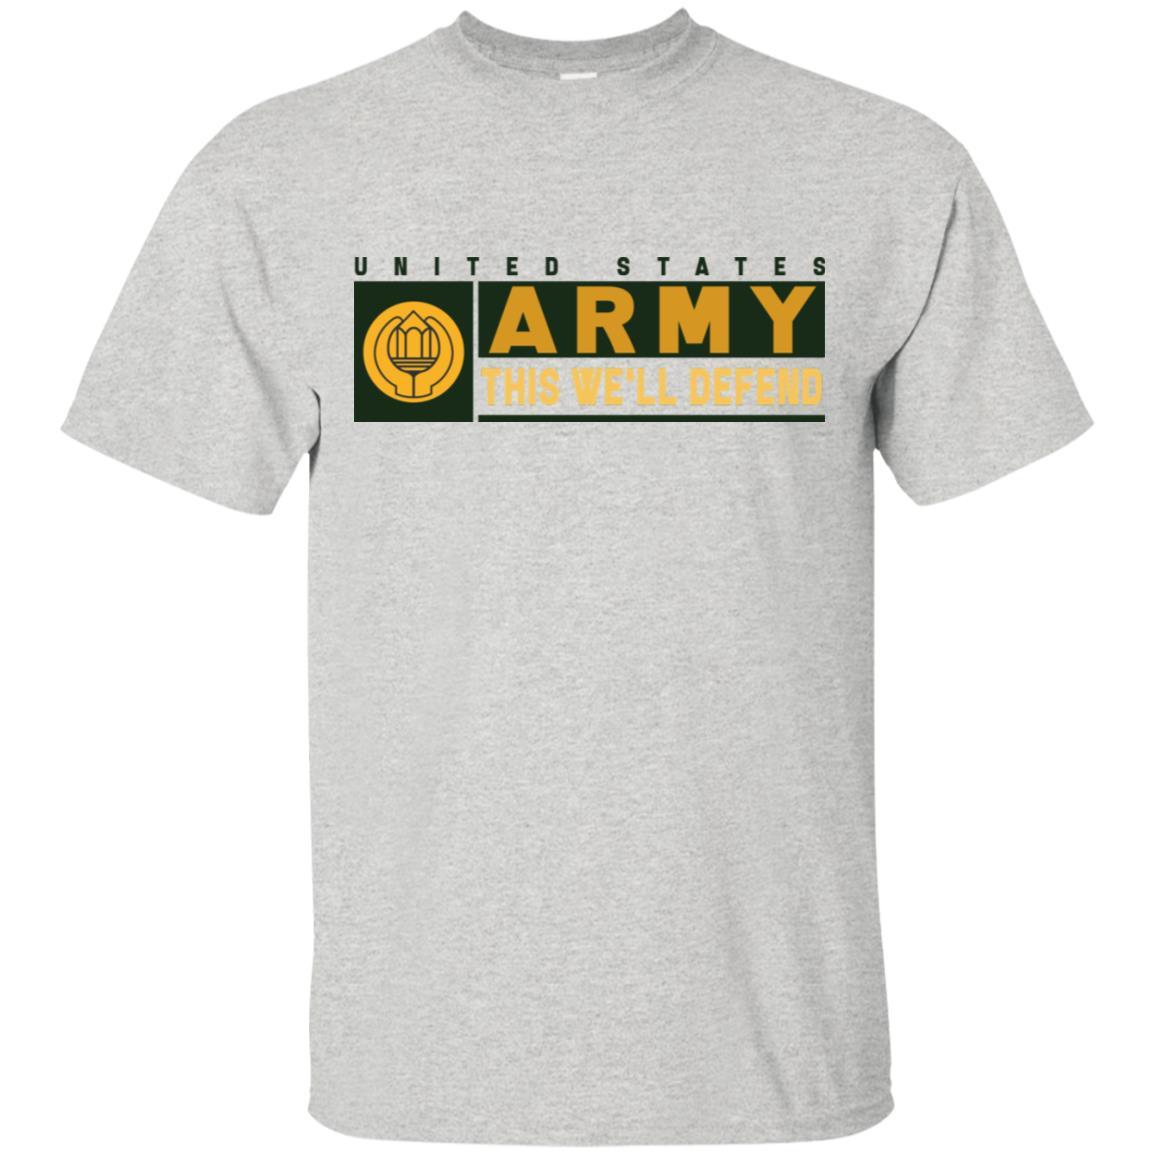 U.S Army Chaplain Assistant- This We'll Defend T-Shirt On Front For Men-TShirt-Army-Veterans Nation